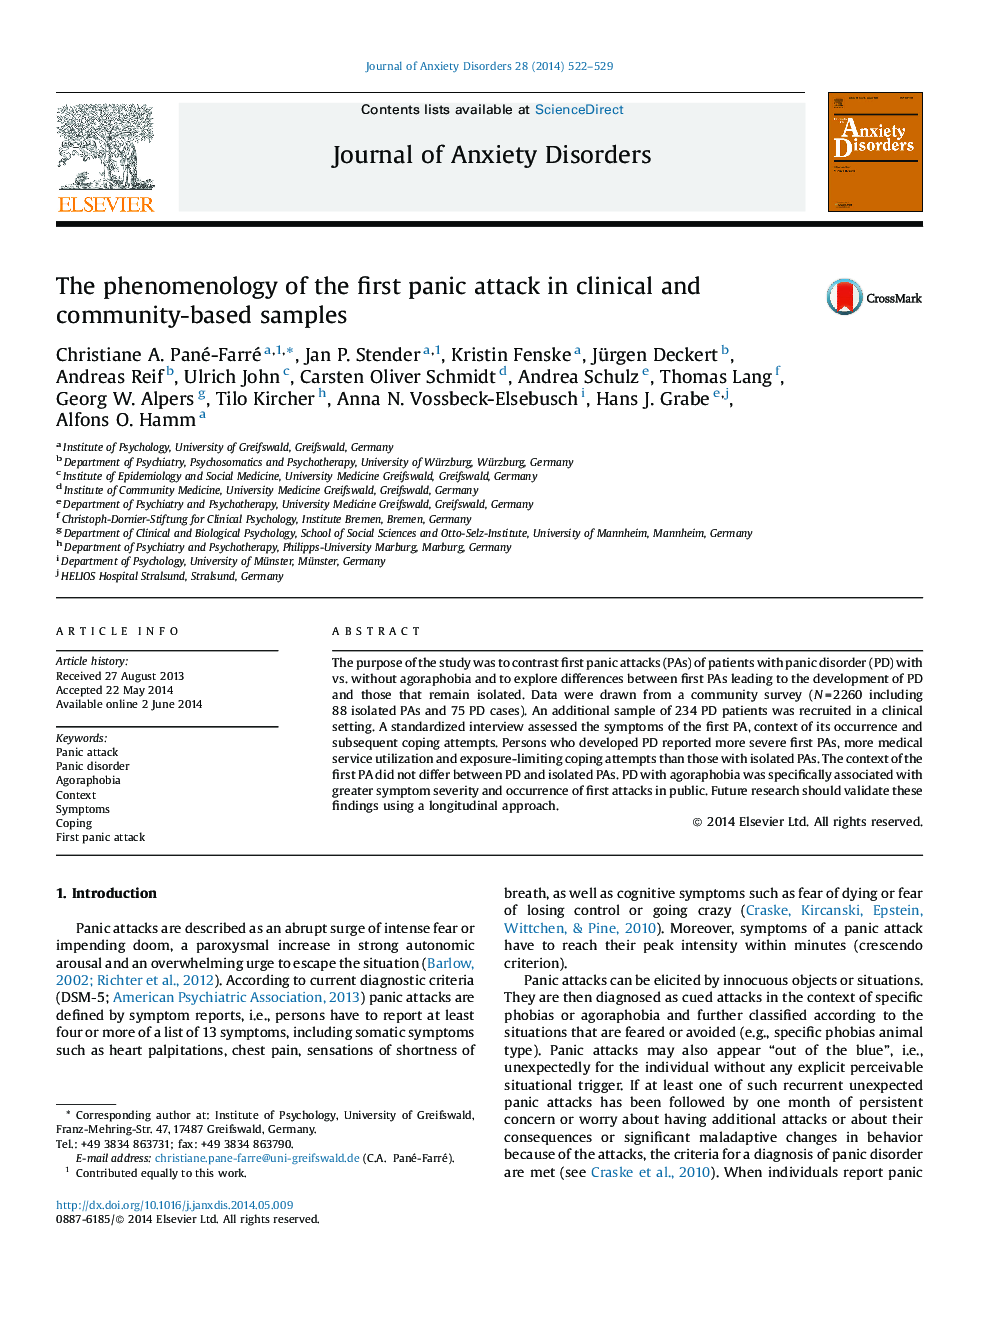 The phenomenology of the first panic attack in clinical and community-based samples